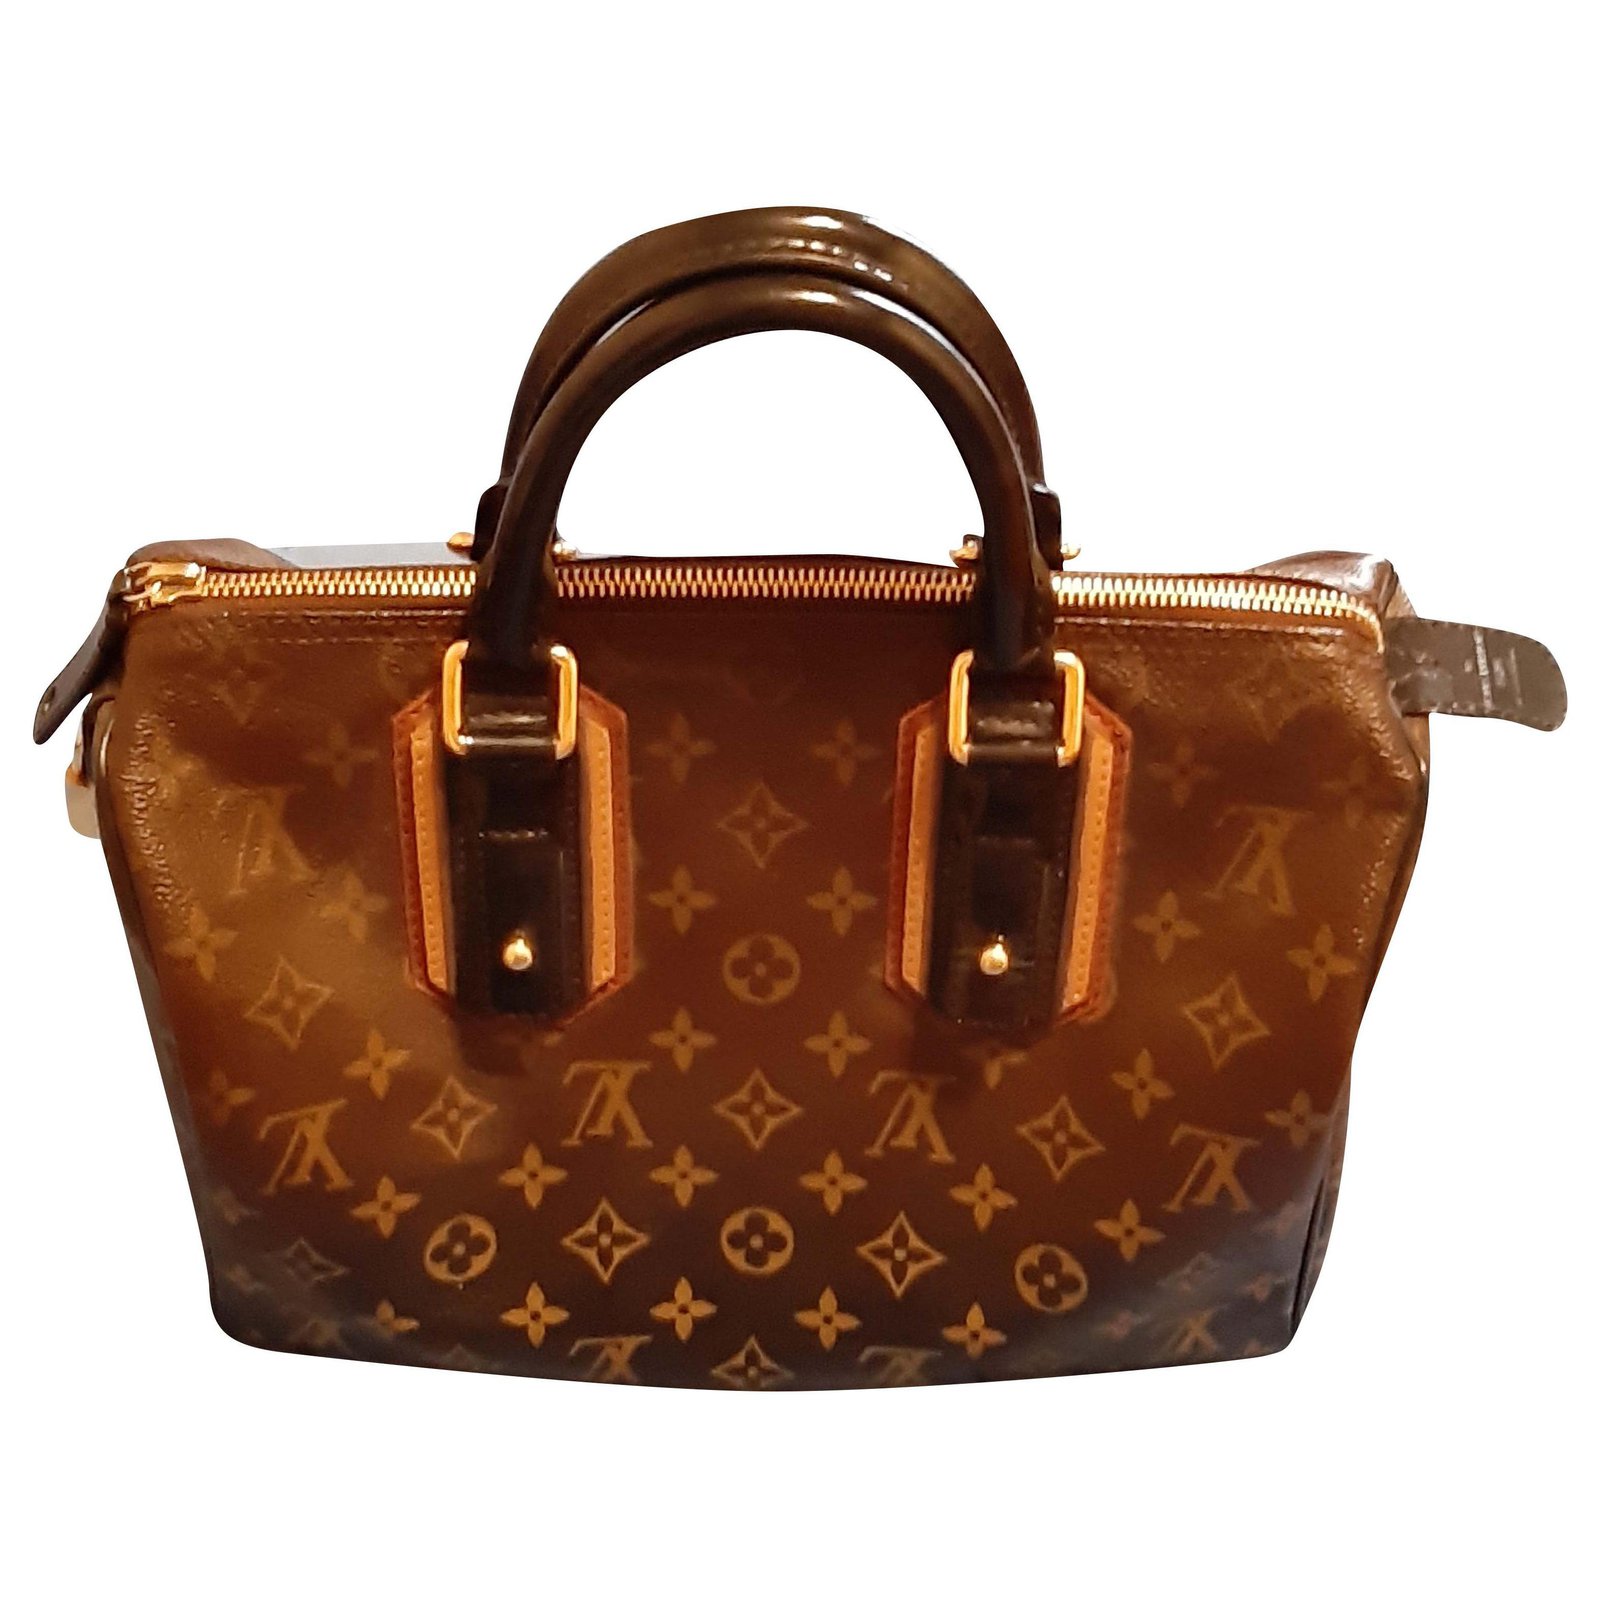 Louis Vuitton handbag in brown shading leather